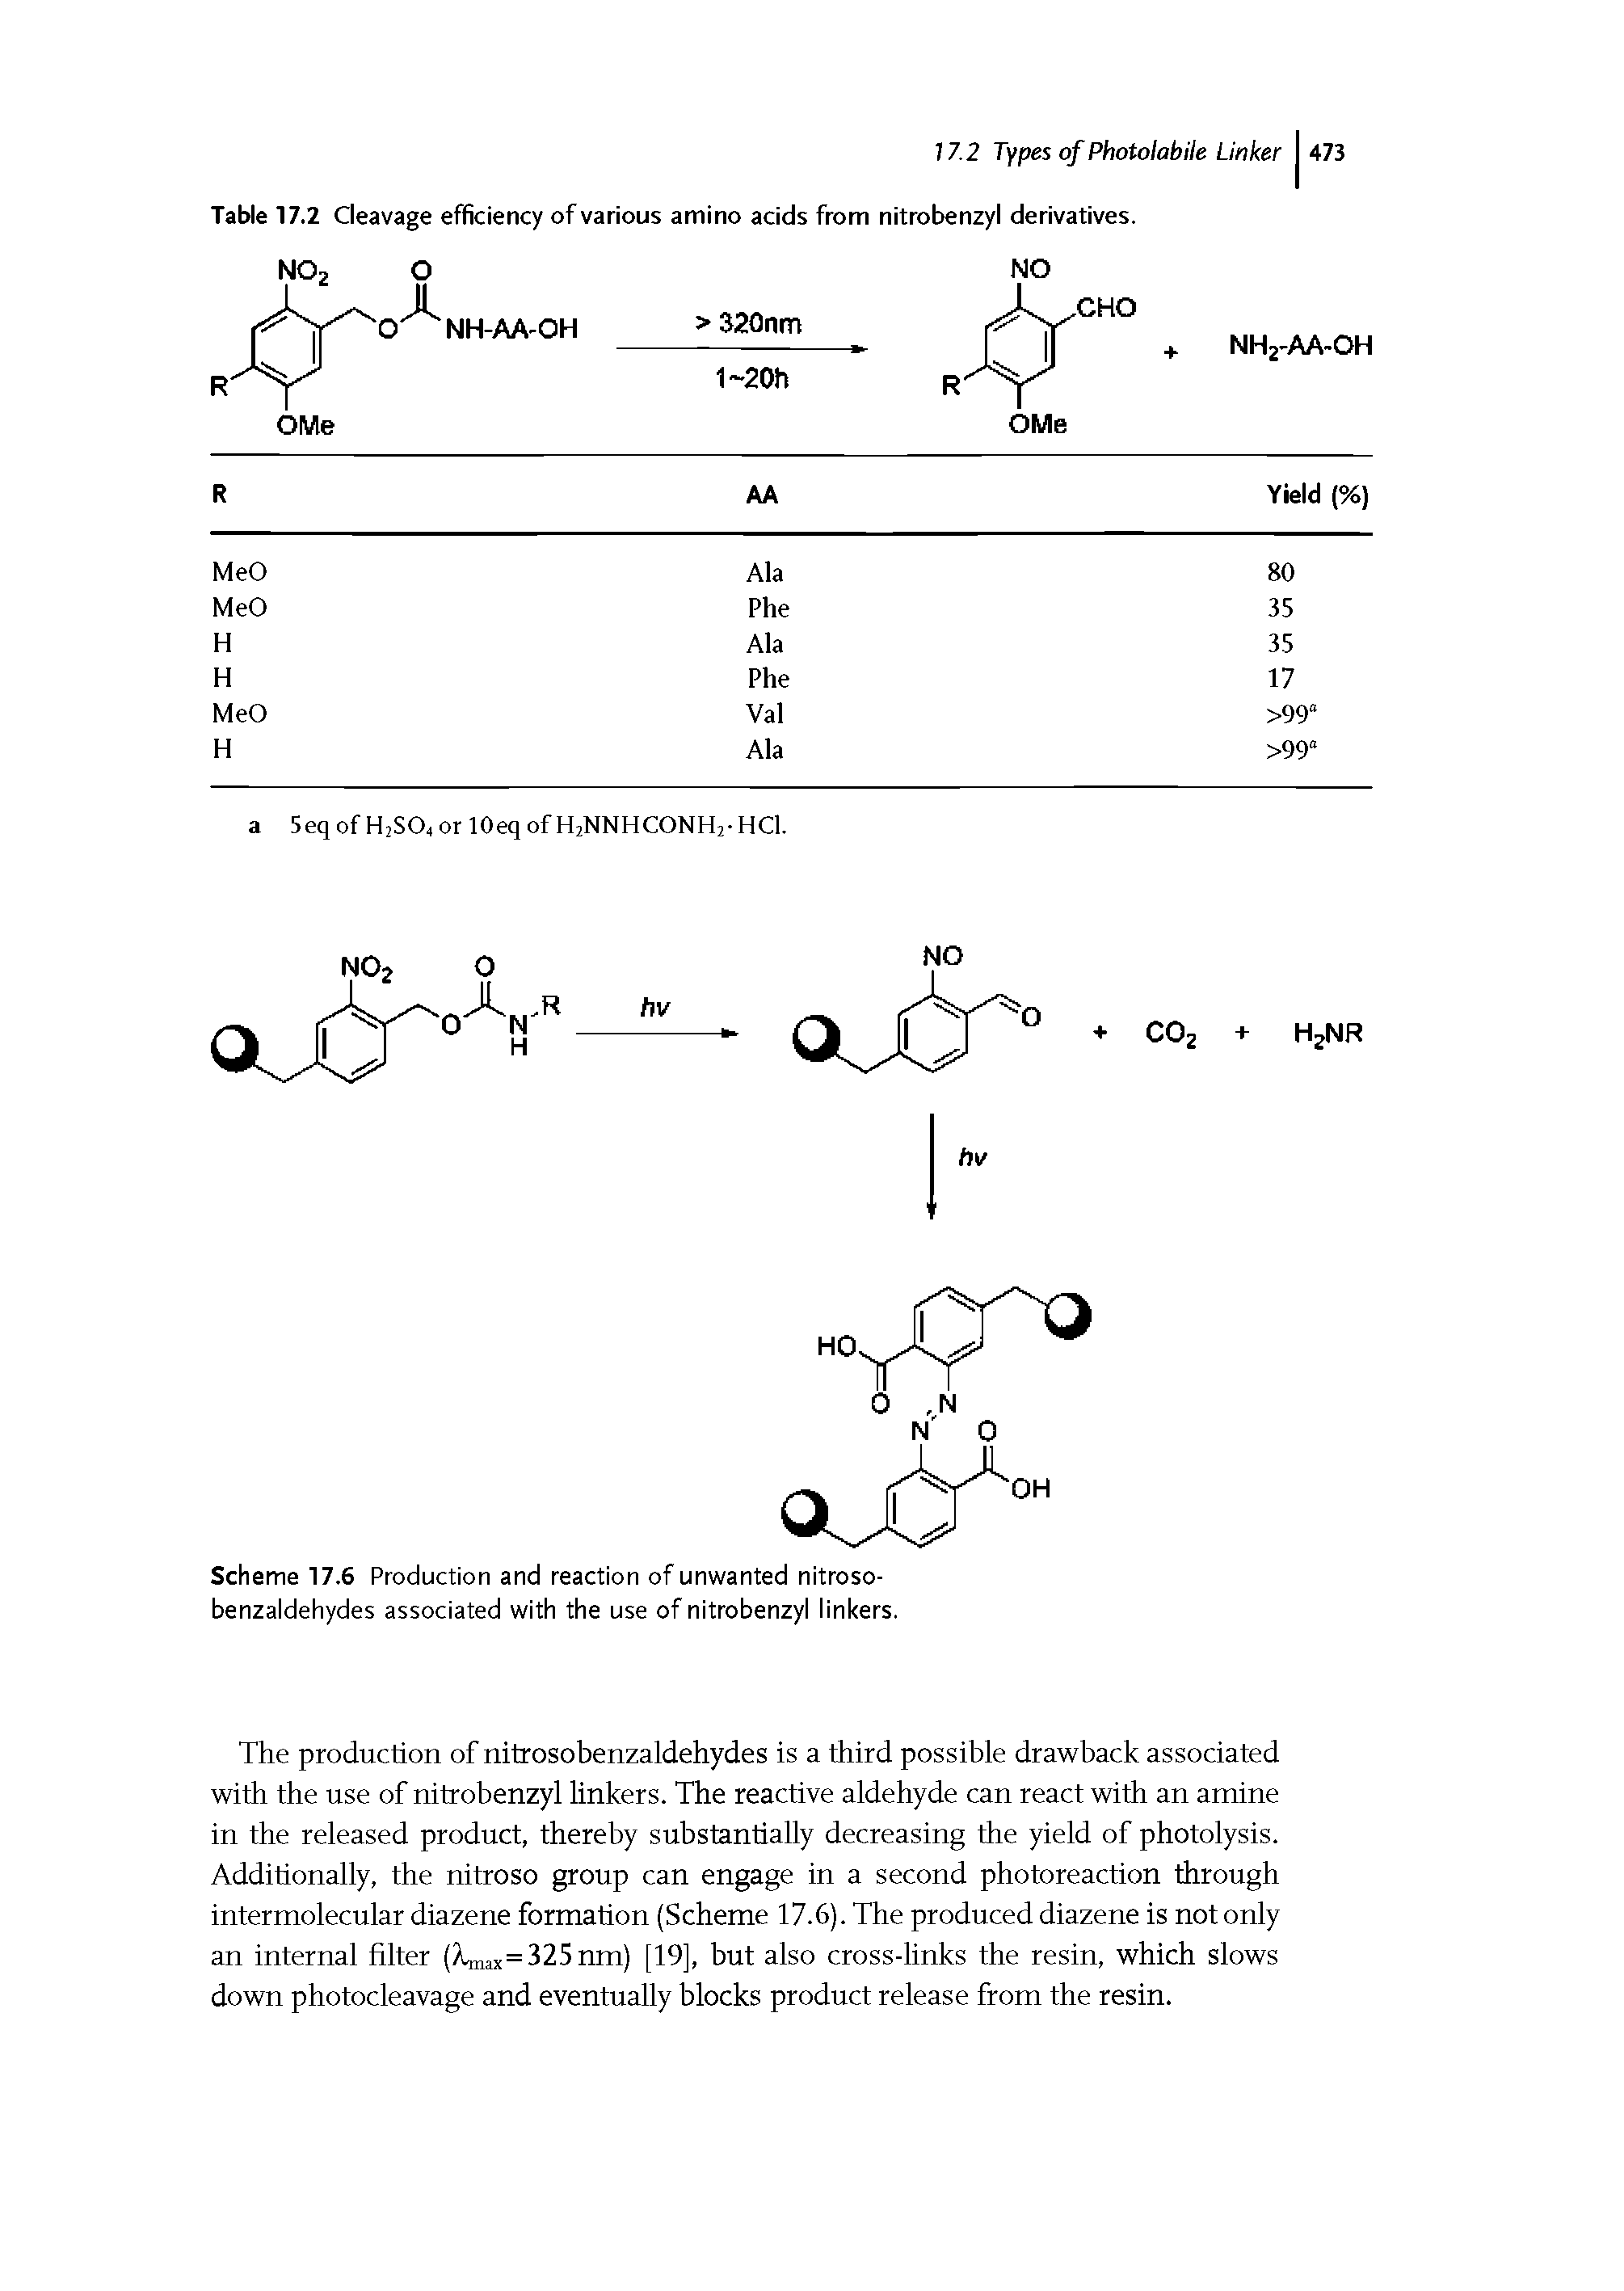 Scheme 17.6 Production and reaction of unwanted nitroso-benzaldehydes associated with the use of nitrobenzyl linkers.